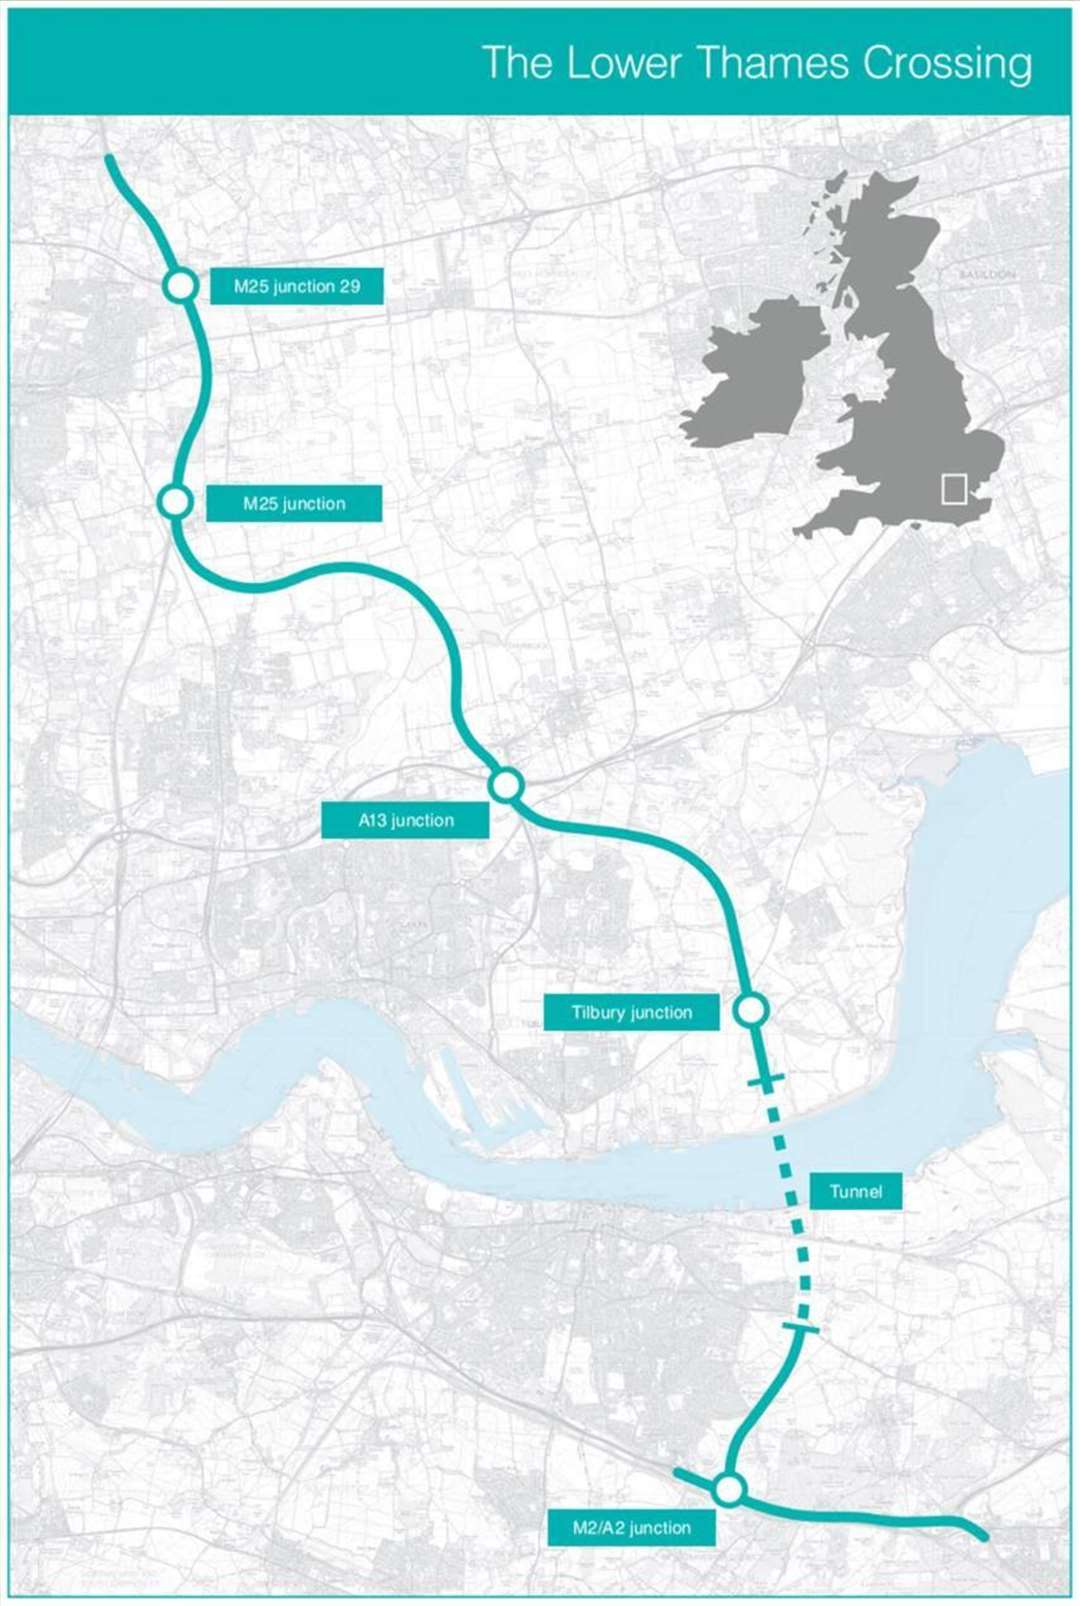 The proposed route of the Lower Thames Crossing